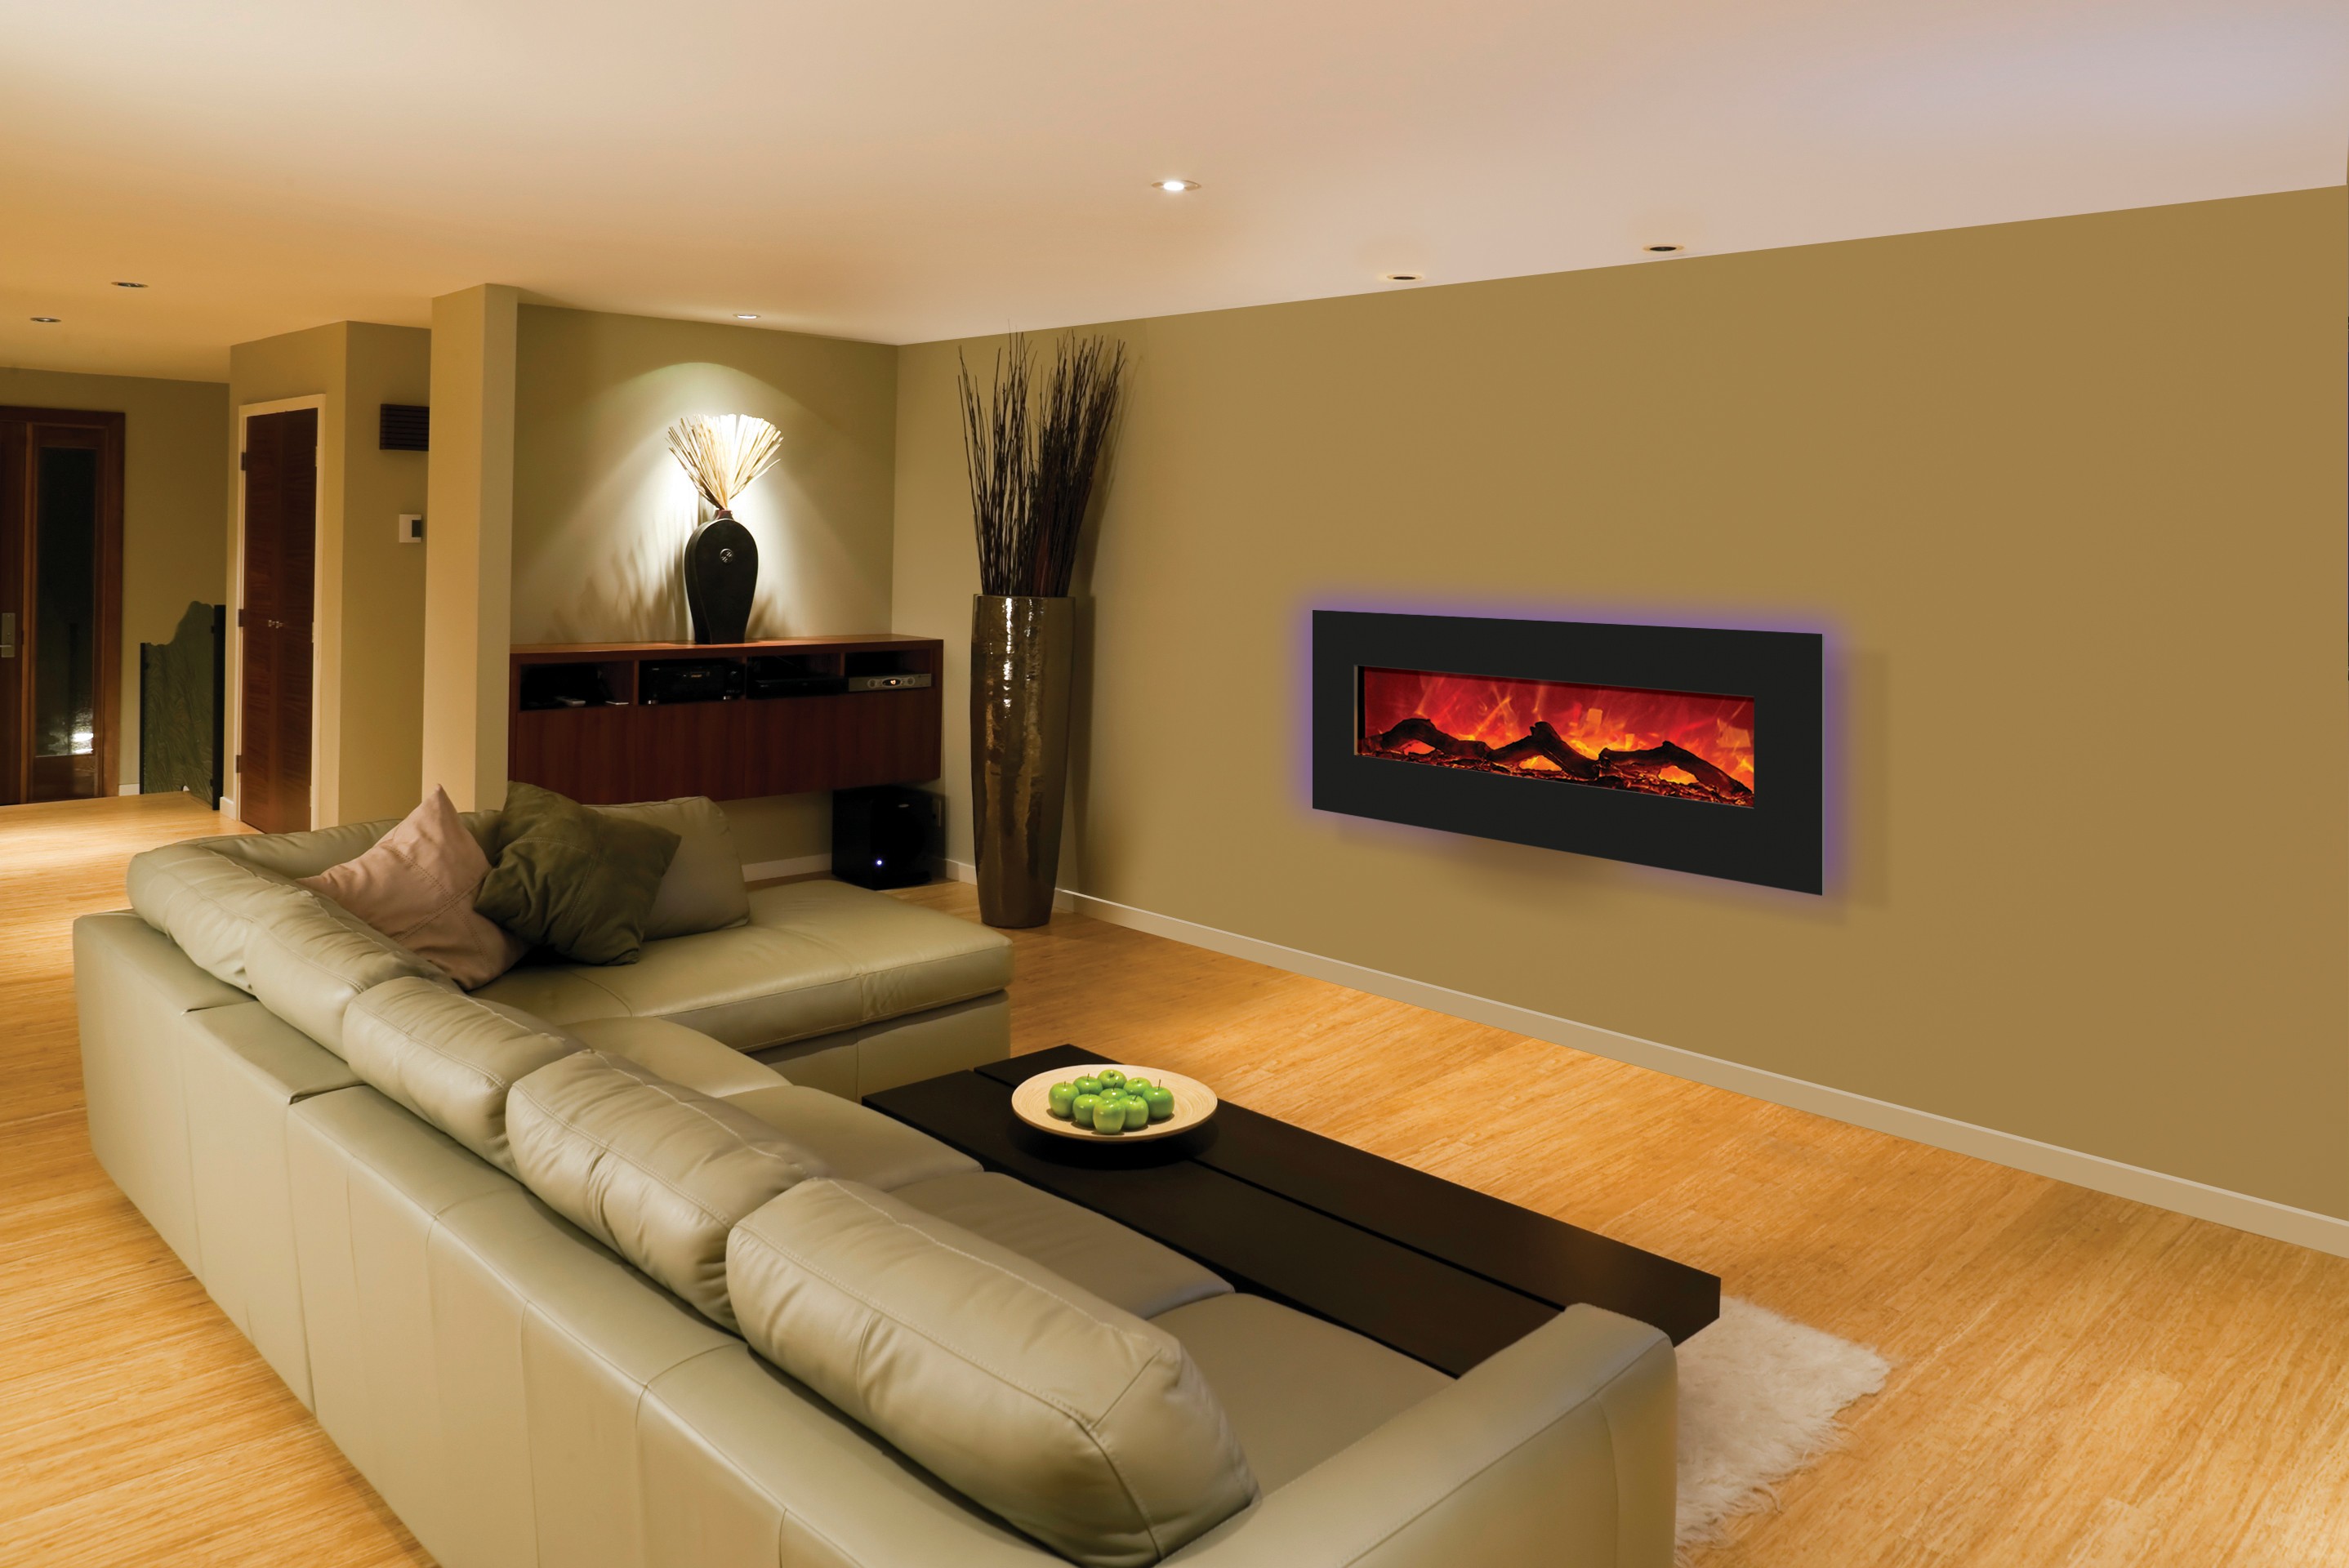 Electric Fireplace Blower Luxury Cool Electric Fireplace Ideas Fireplace Design Ideas